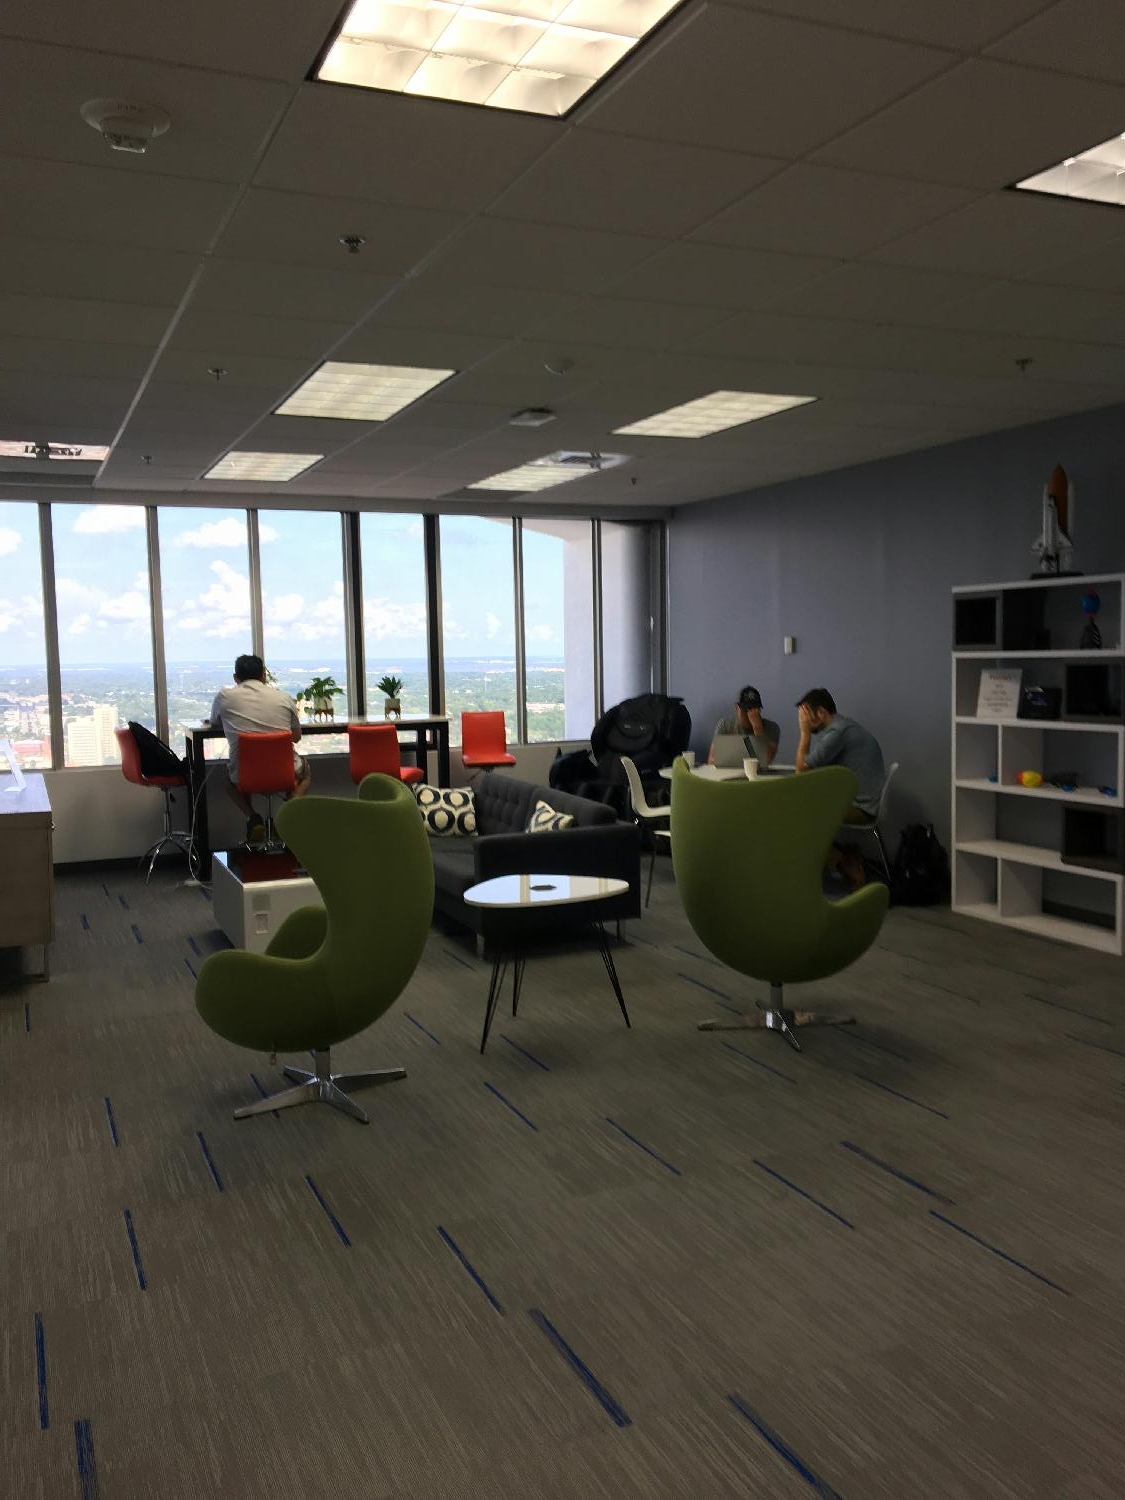 HQ Meeting Area.  Employees can lounge, play video games, converse or admire the view of downtown Jacksonville.